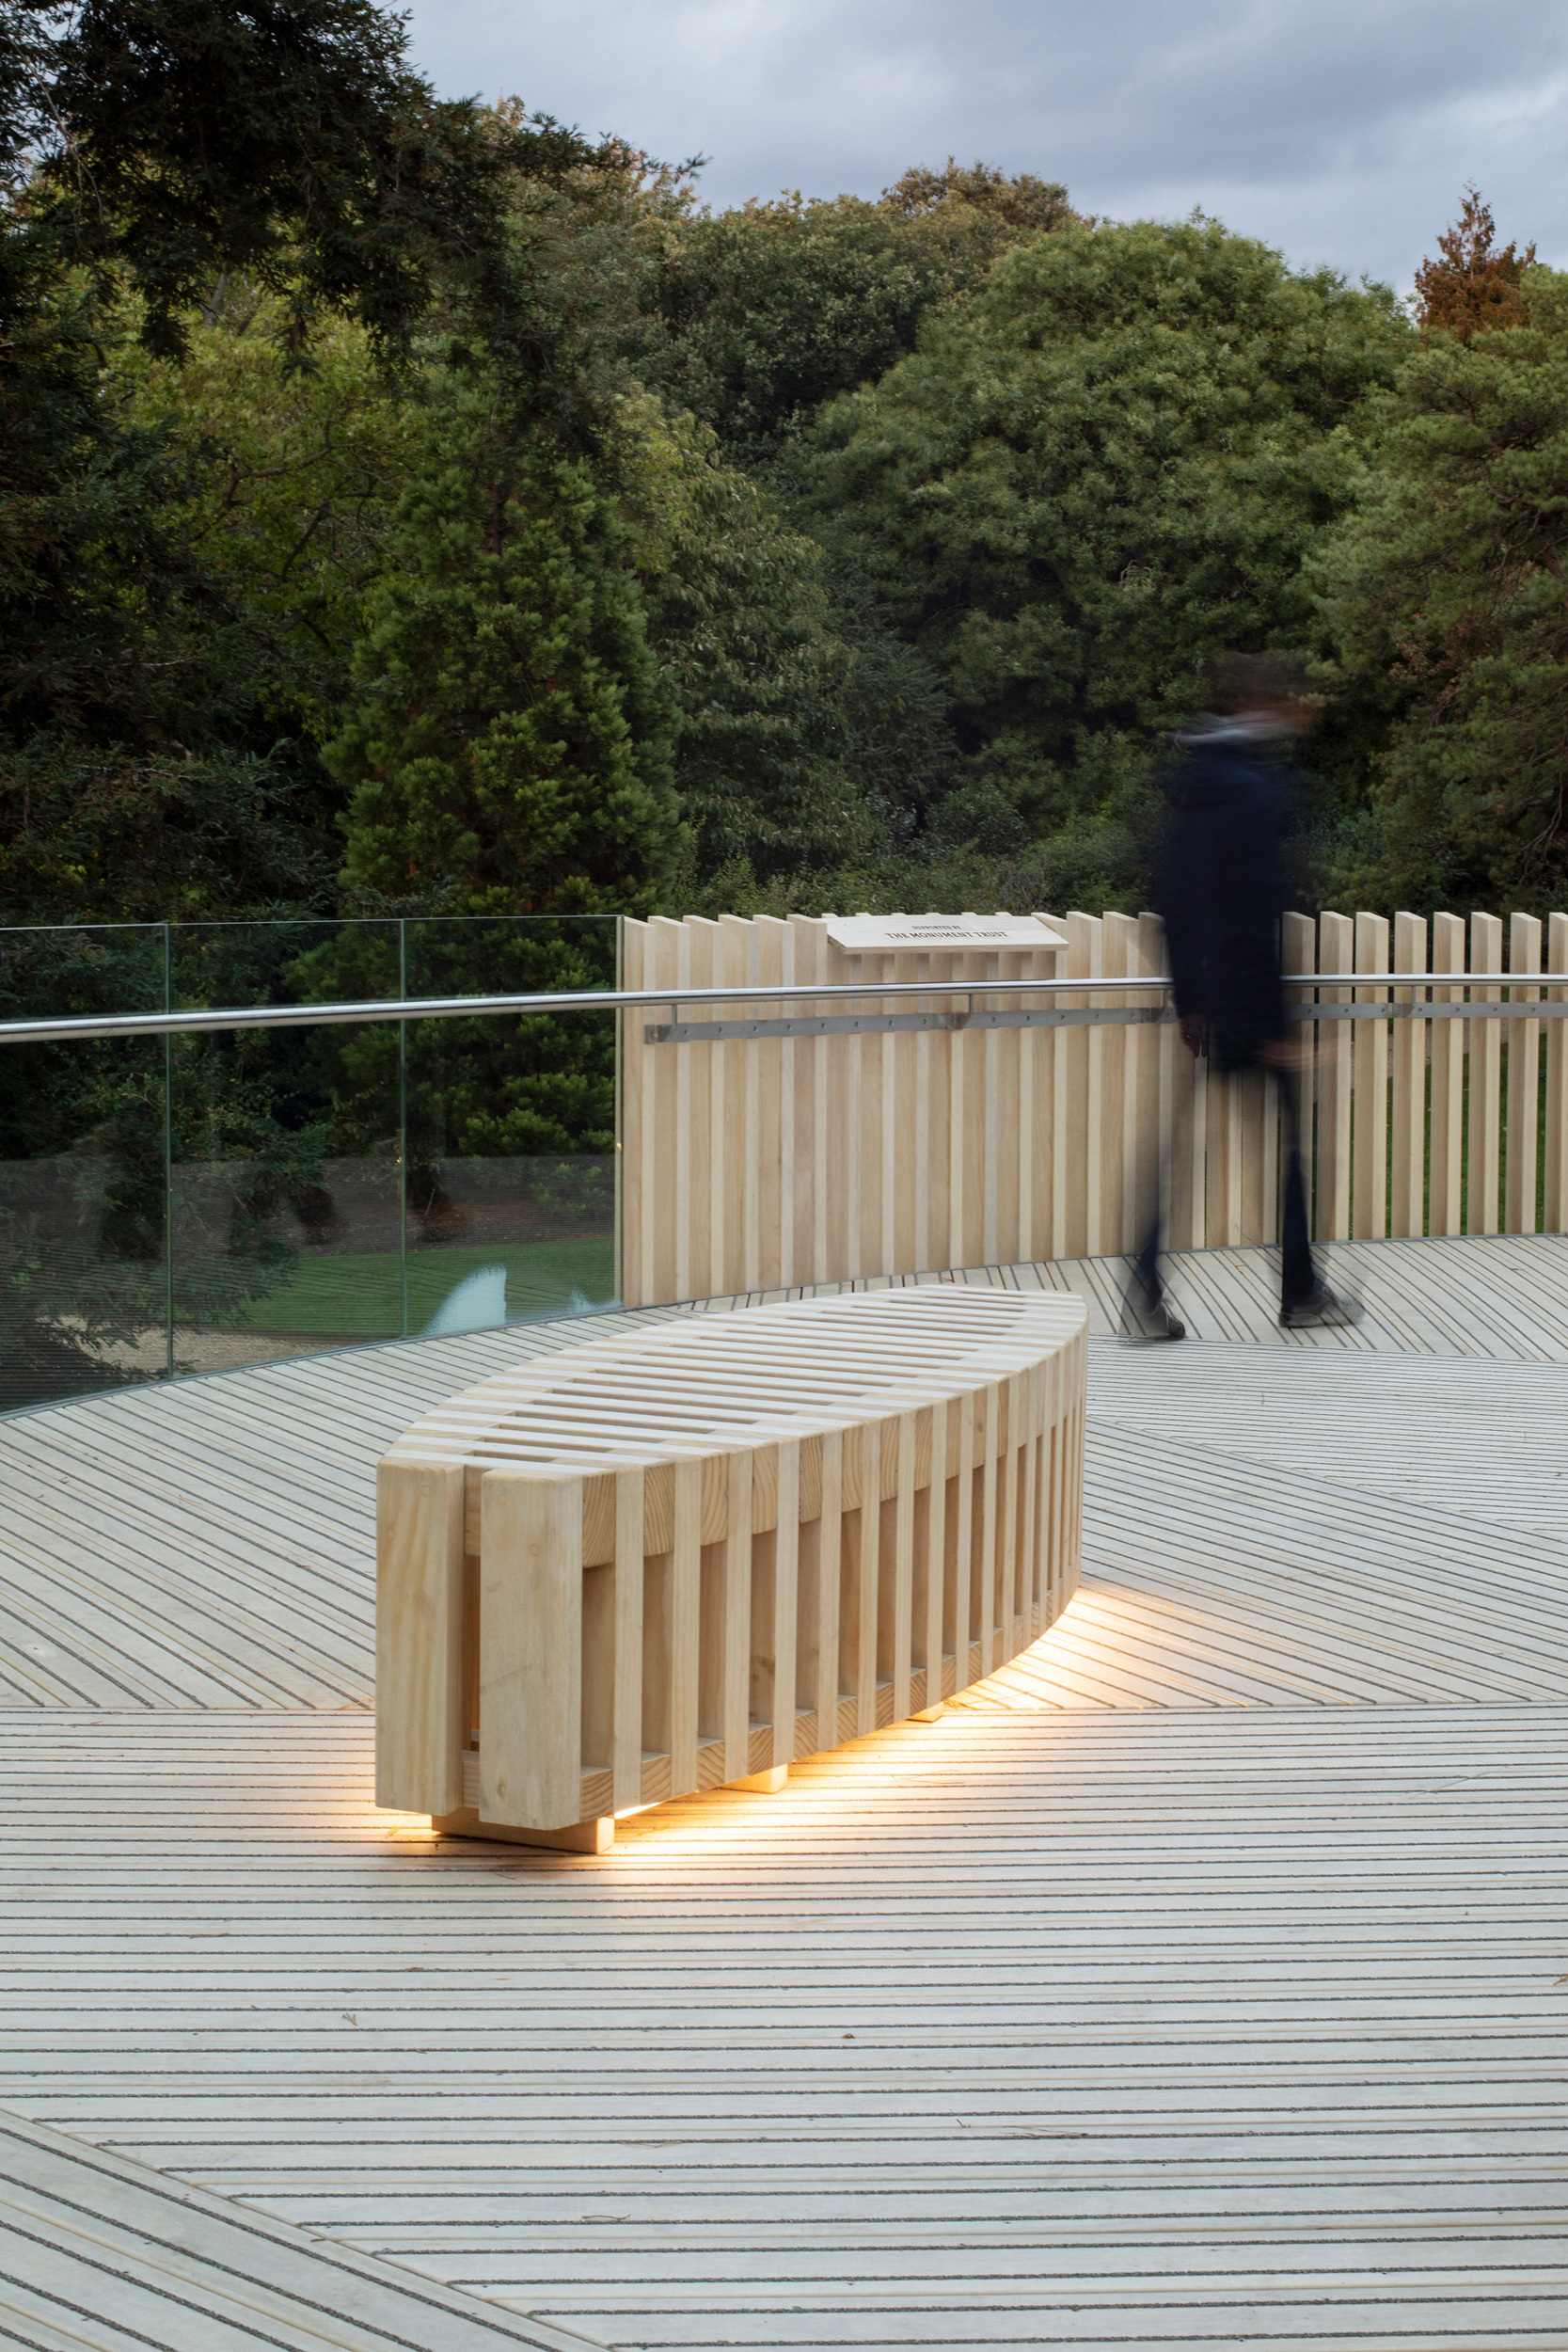 Under seat lighting used on a bench on the viewing platform of The Rising Path Cambridge University Botanic Garden by architects CDC Studio. Blurred shape of a Visitor in the background.